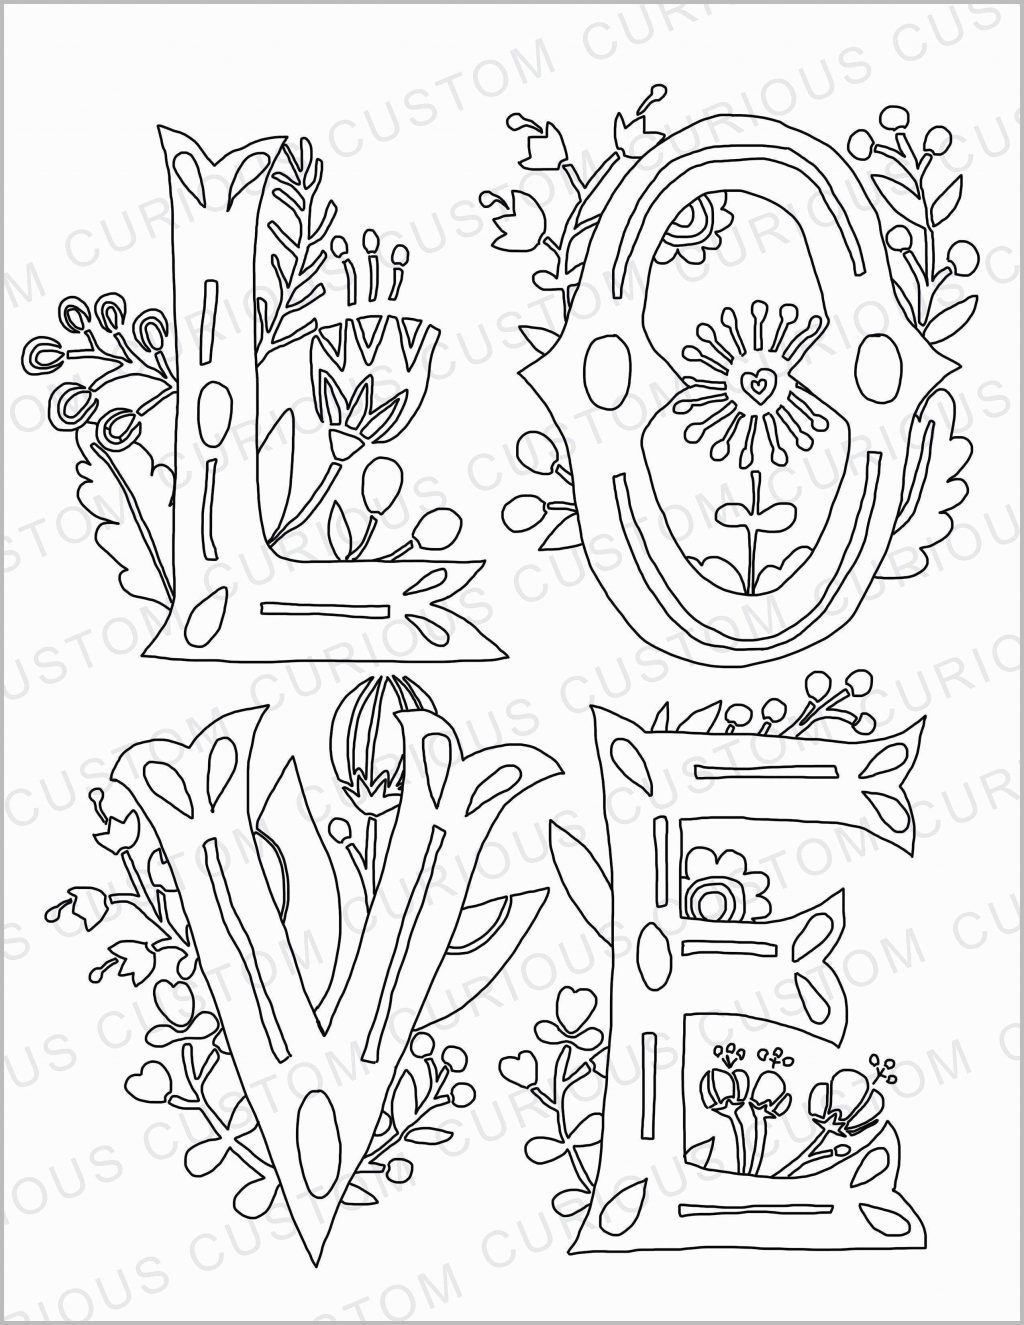 Coloring Book World ~ Free Download Printable Wedding Colouring - Free Printable Personalized Wedding Coloring Book